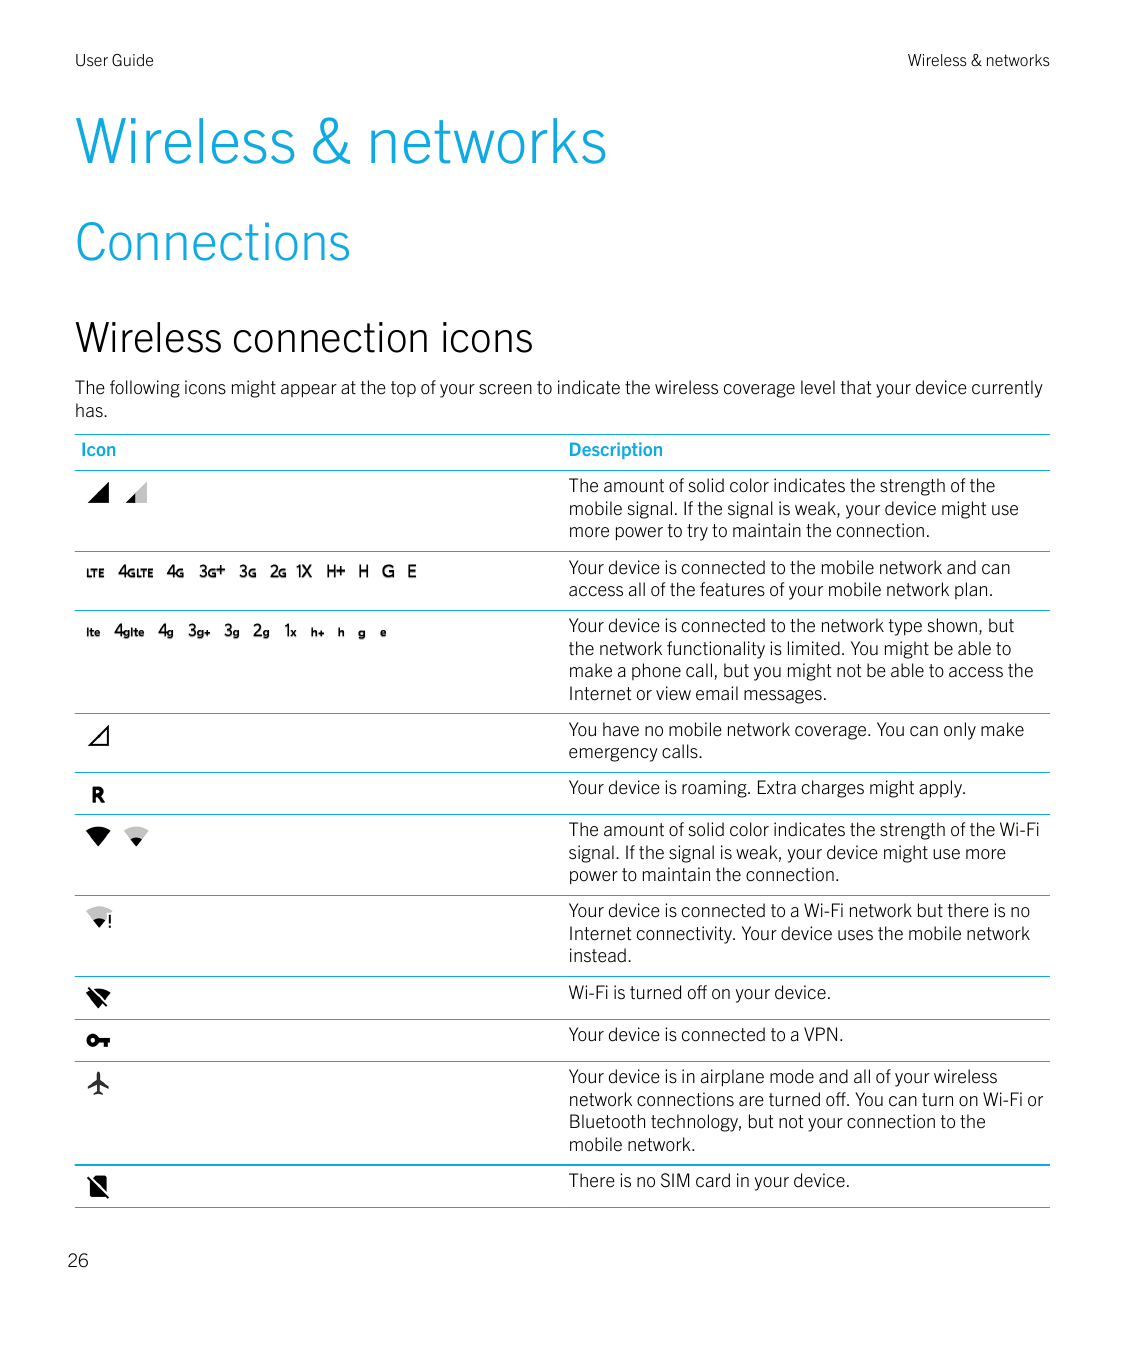 User GuideWireless & networksWireless & networksConnectionsWireless connection iconsThe following icons might appear at the top 